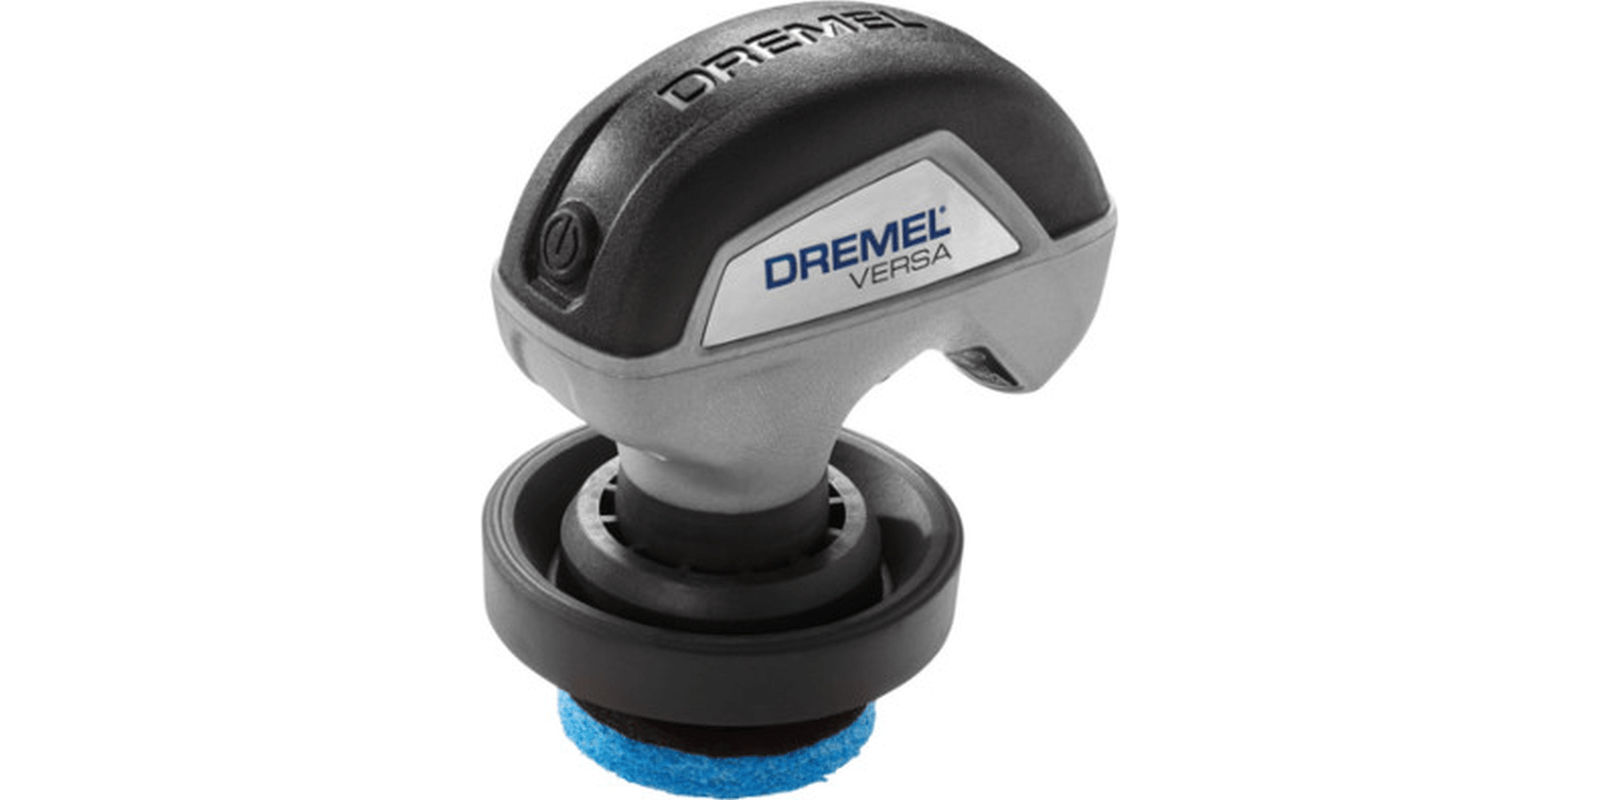 Dremel Versa Cordless Power Scrubber 19Pc Set w/Pads, Brushes USB Cord and  Bag